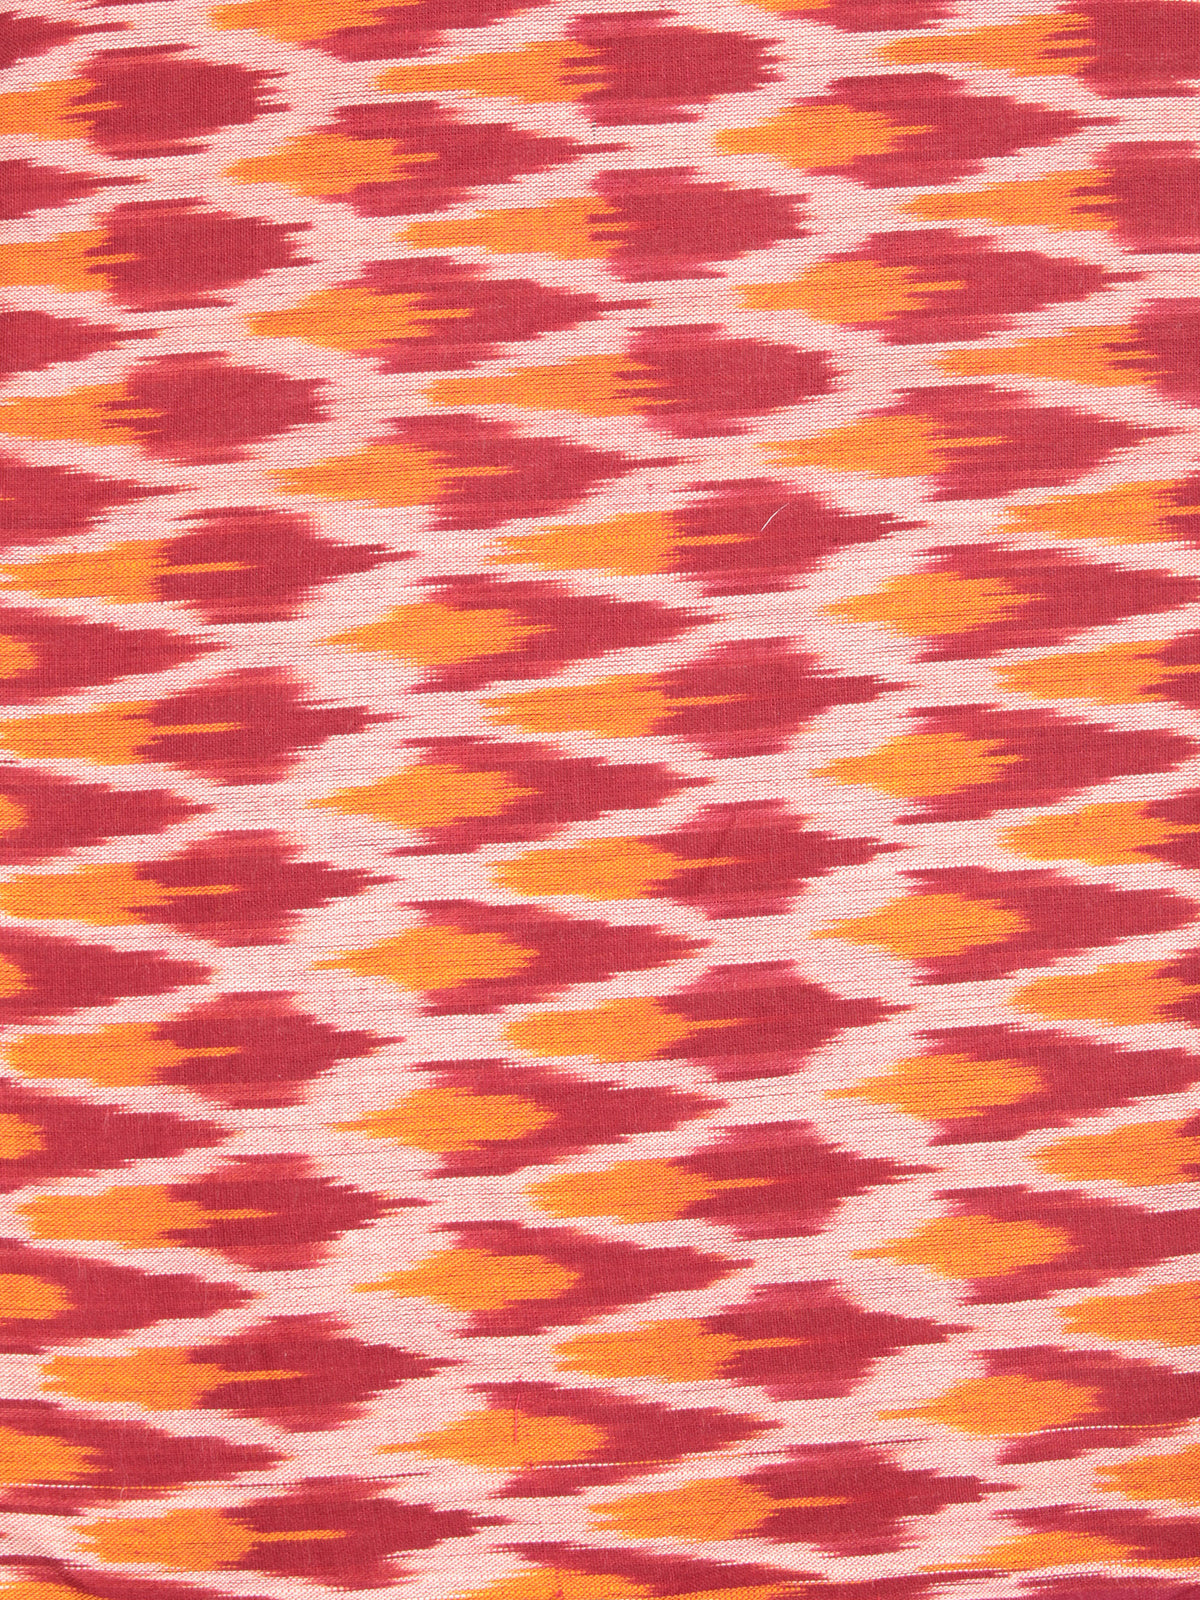 Ivory Red Yellow Hand Woven Ikat Handloom Cotton Fabric Per Meter - F002F2430